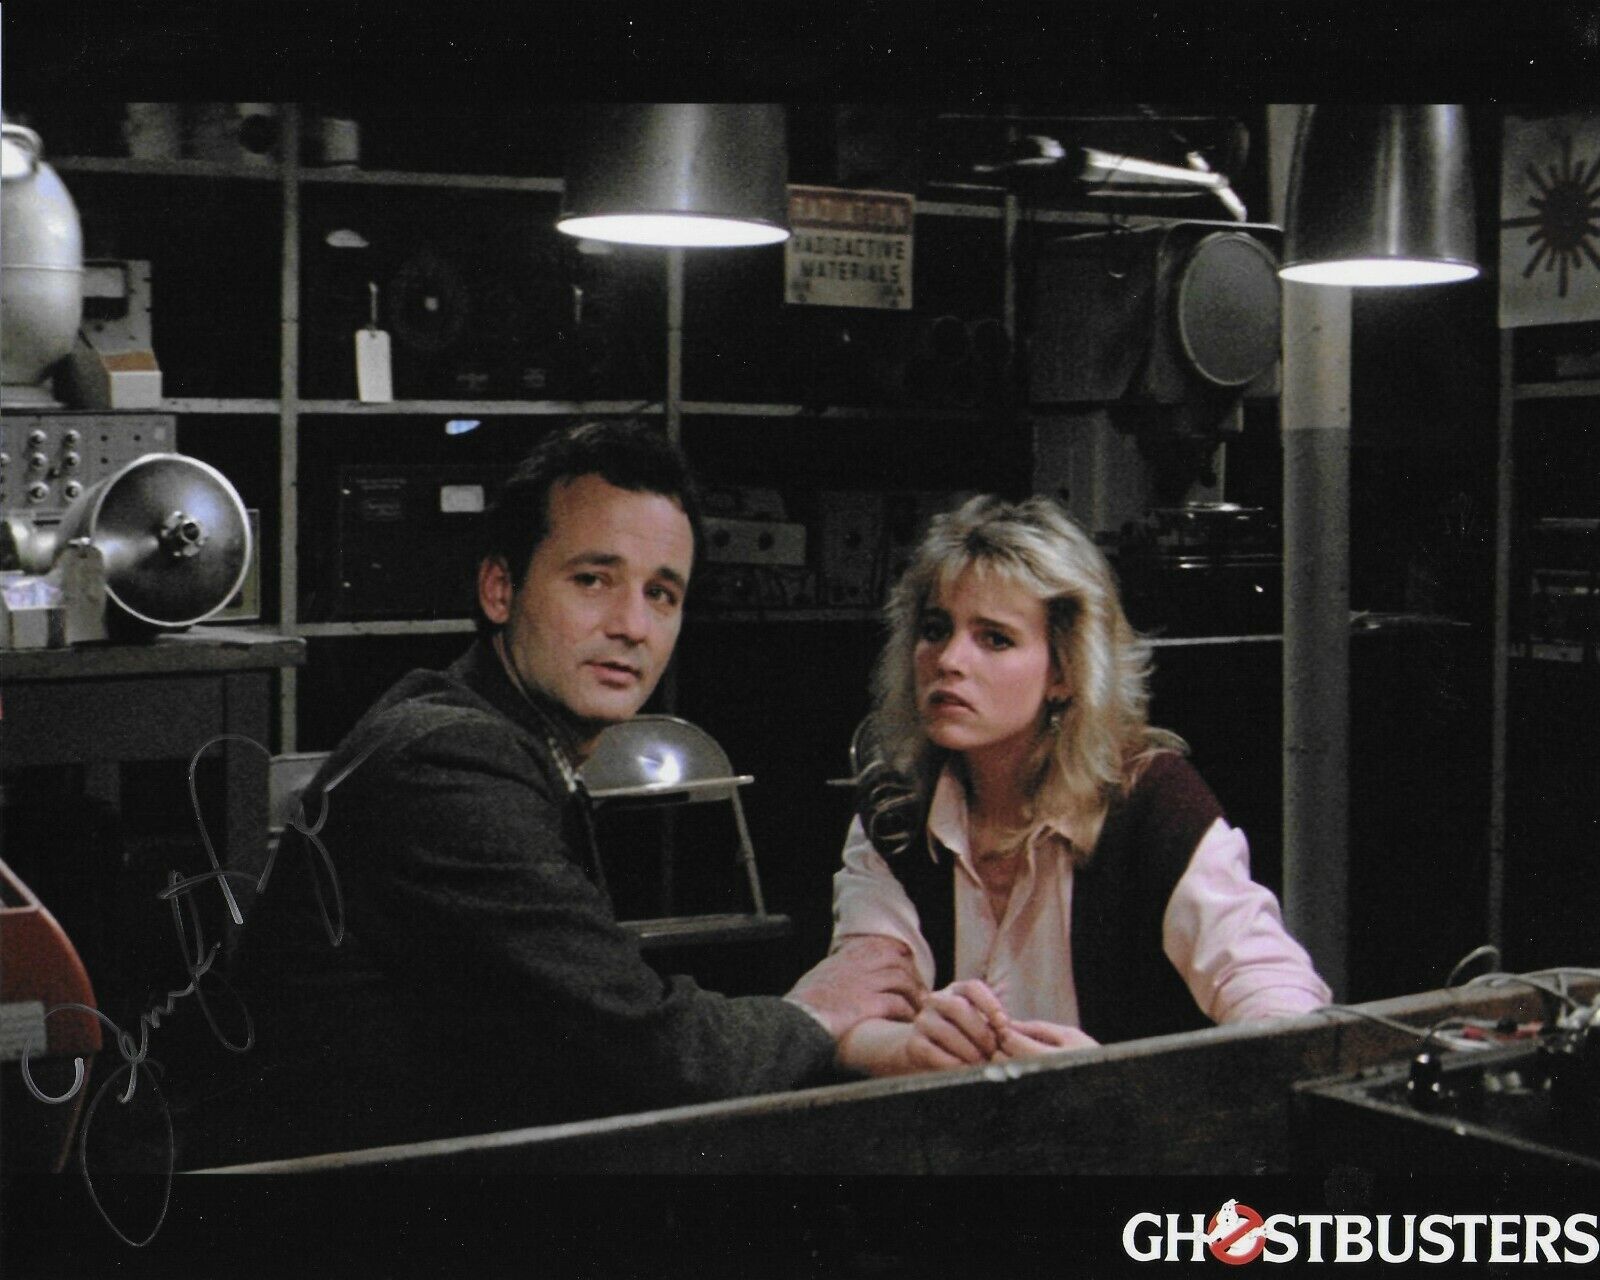 Jennifer Runyon Ghostbusters Original 8X10 Autographed Photo Poster painting #7